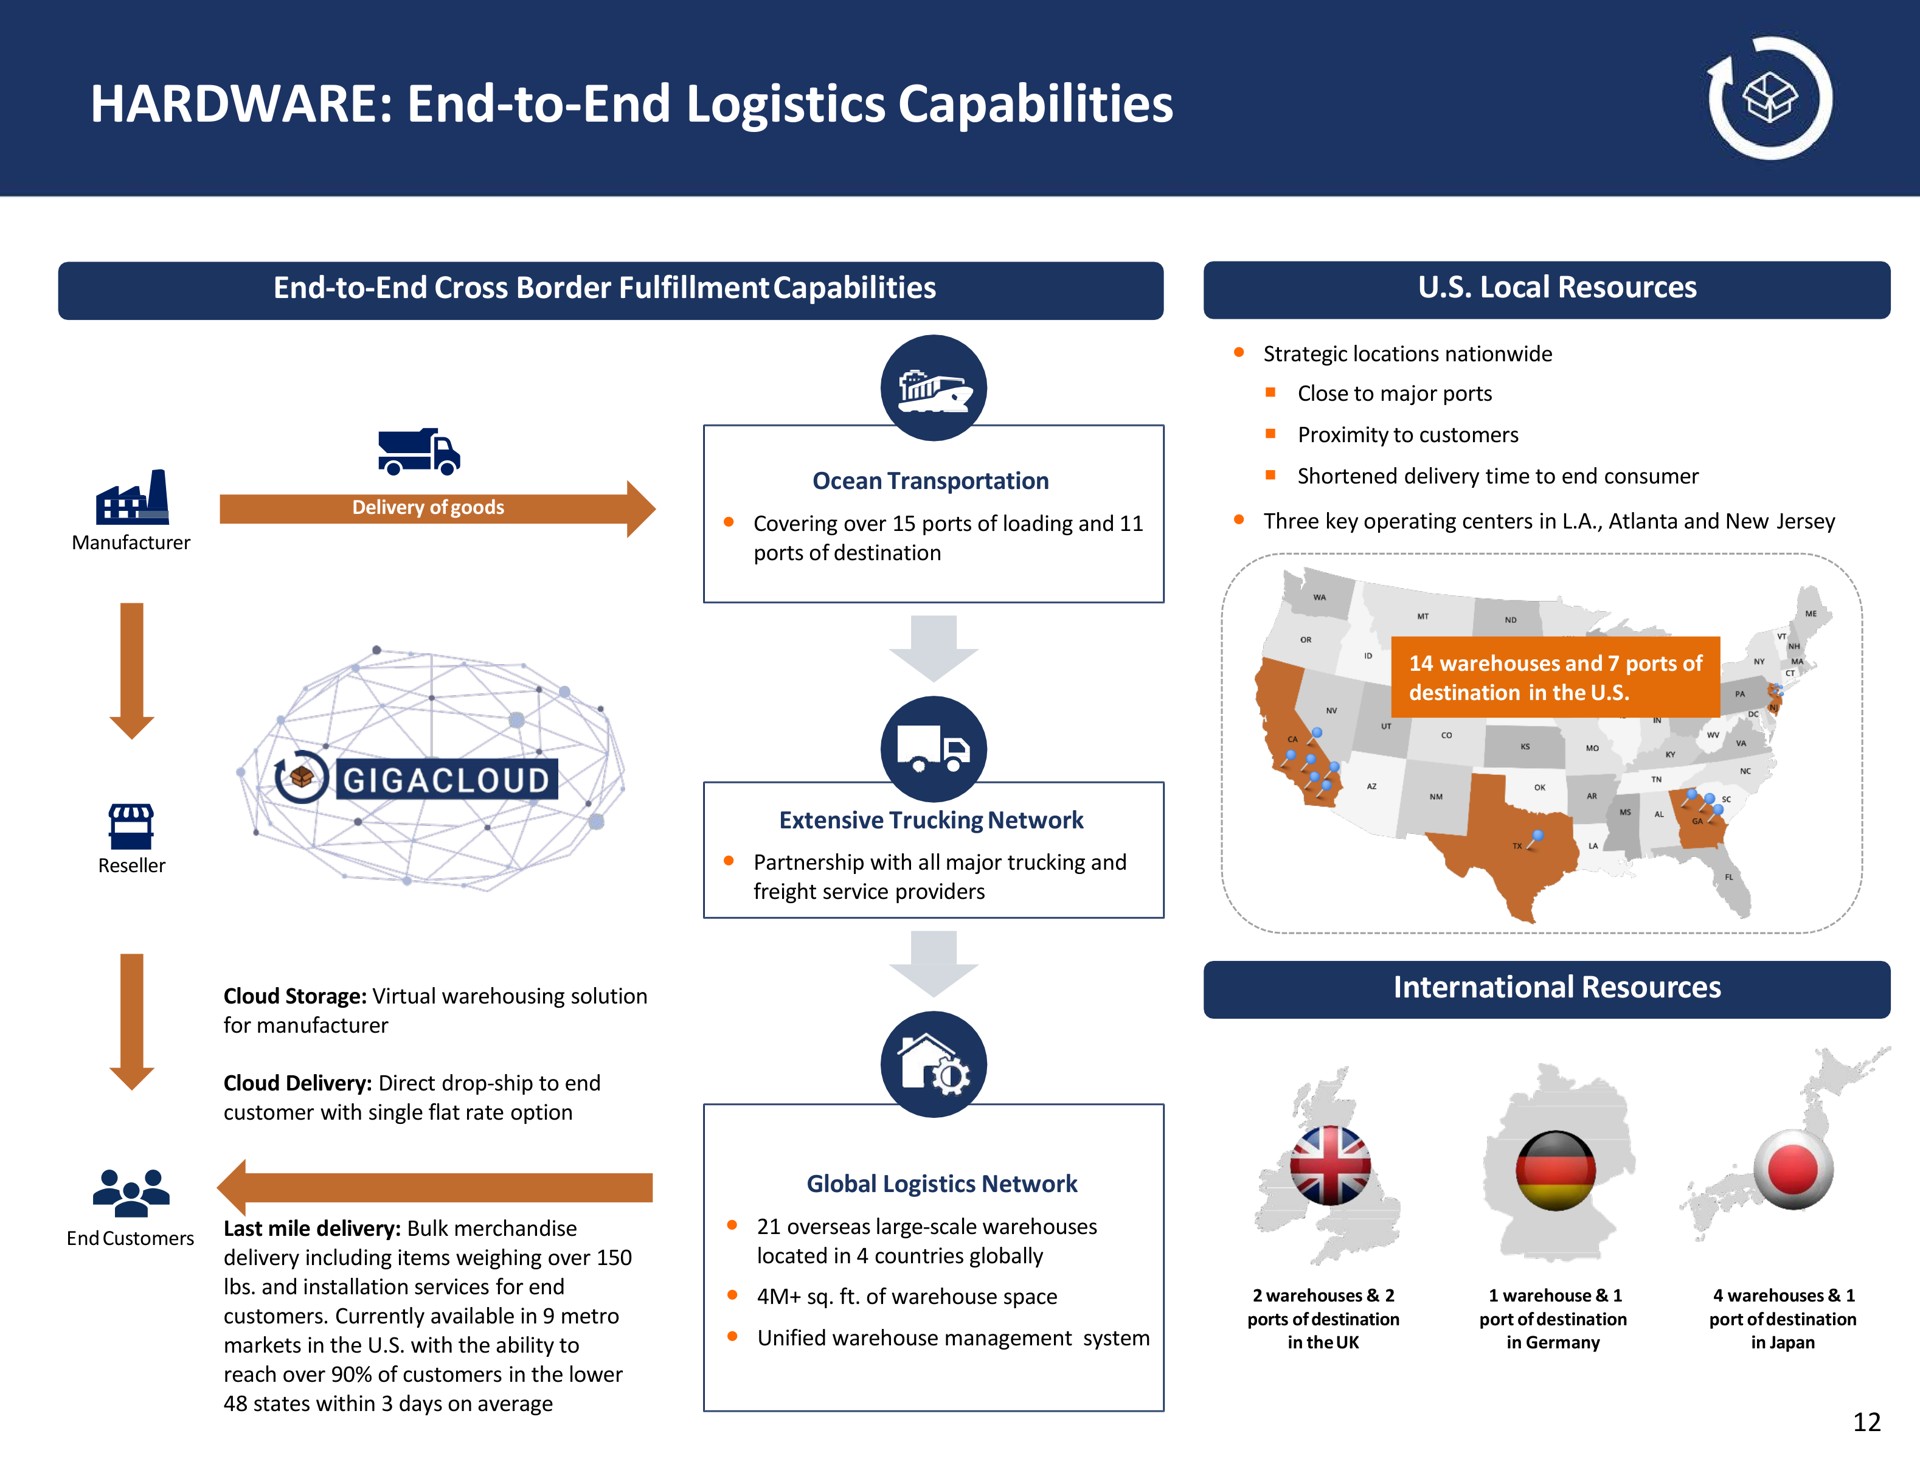 hardware end to end logistics capabilities global network | GigaCloud Technology